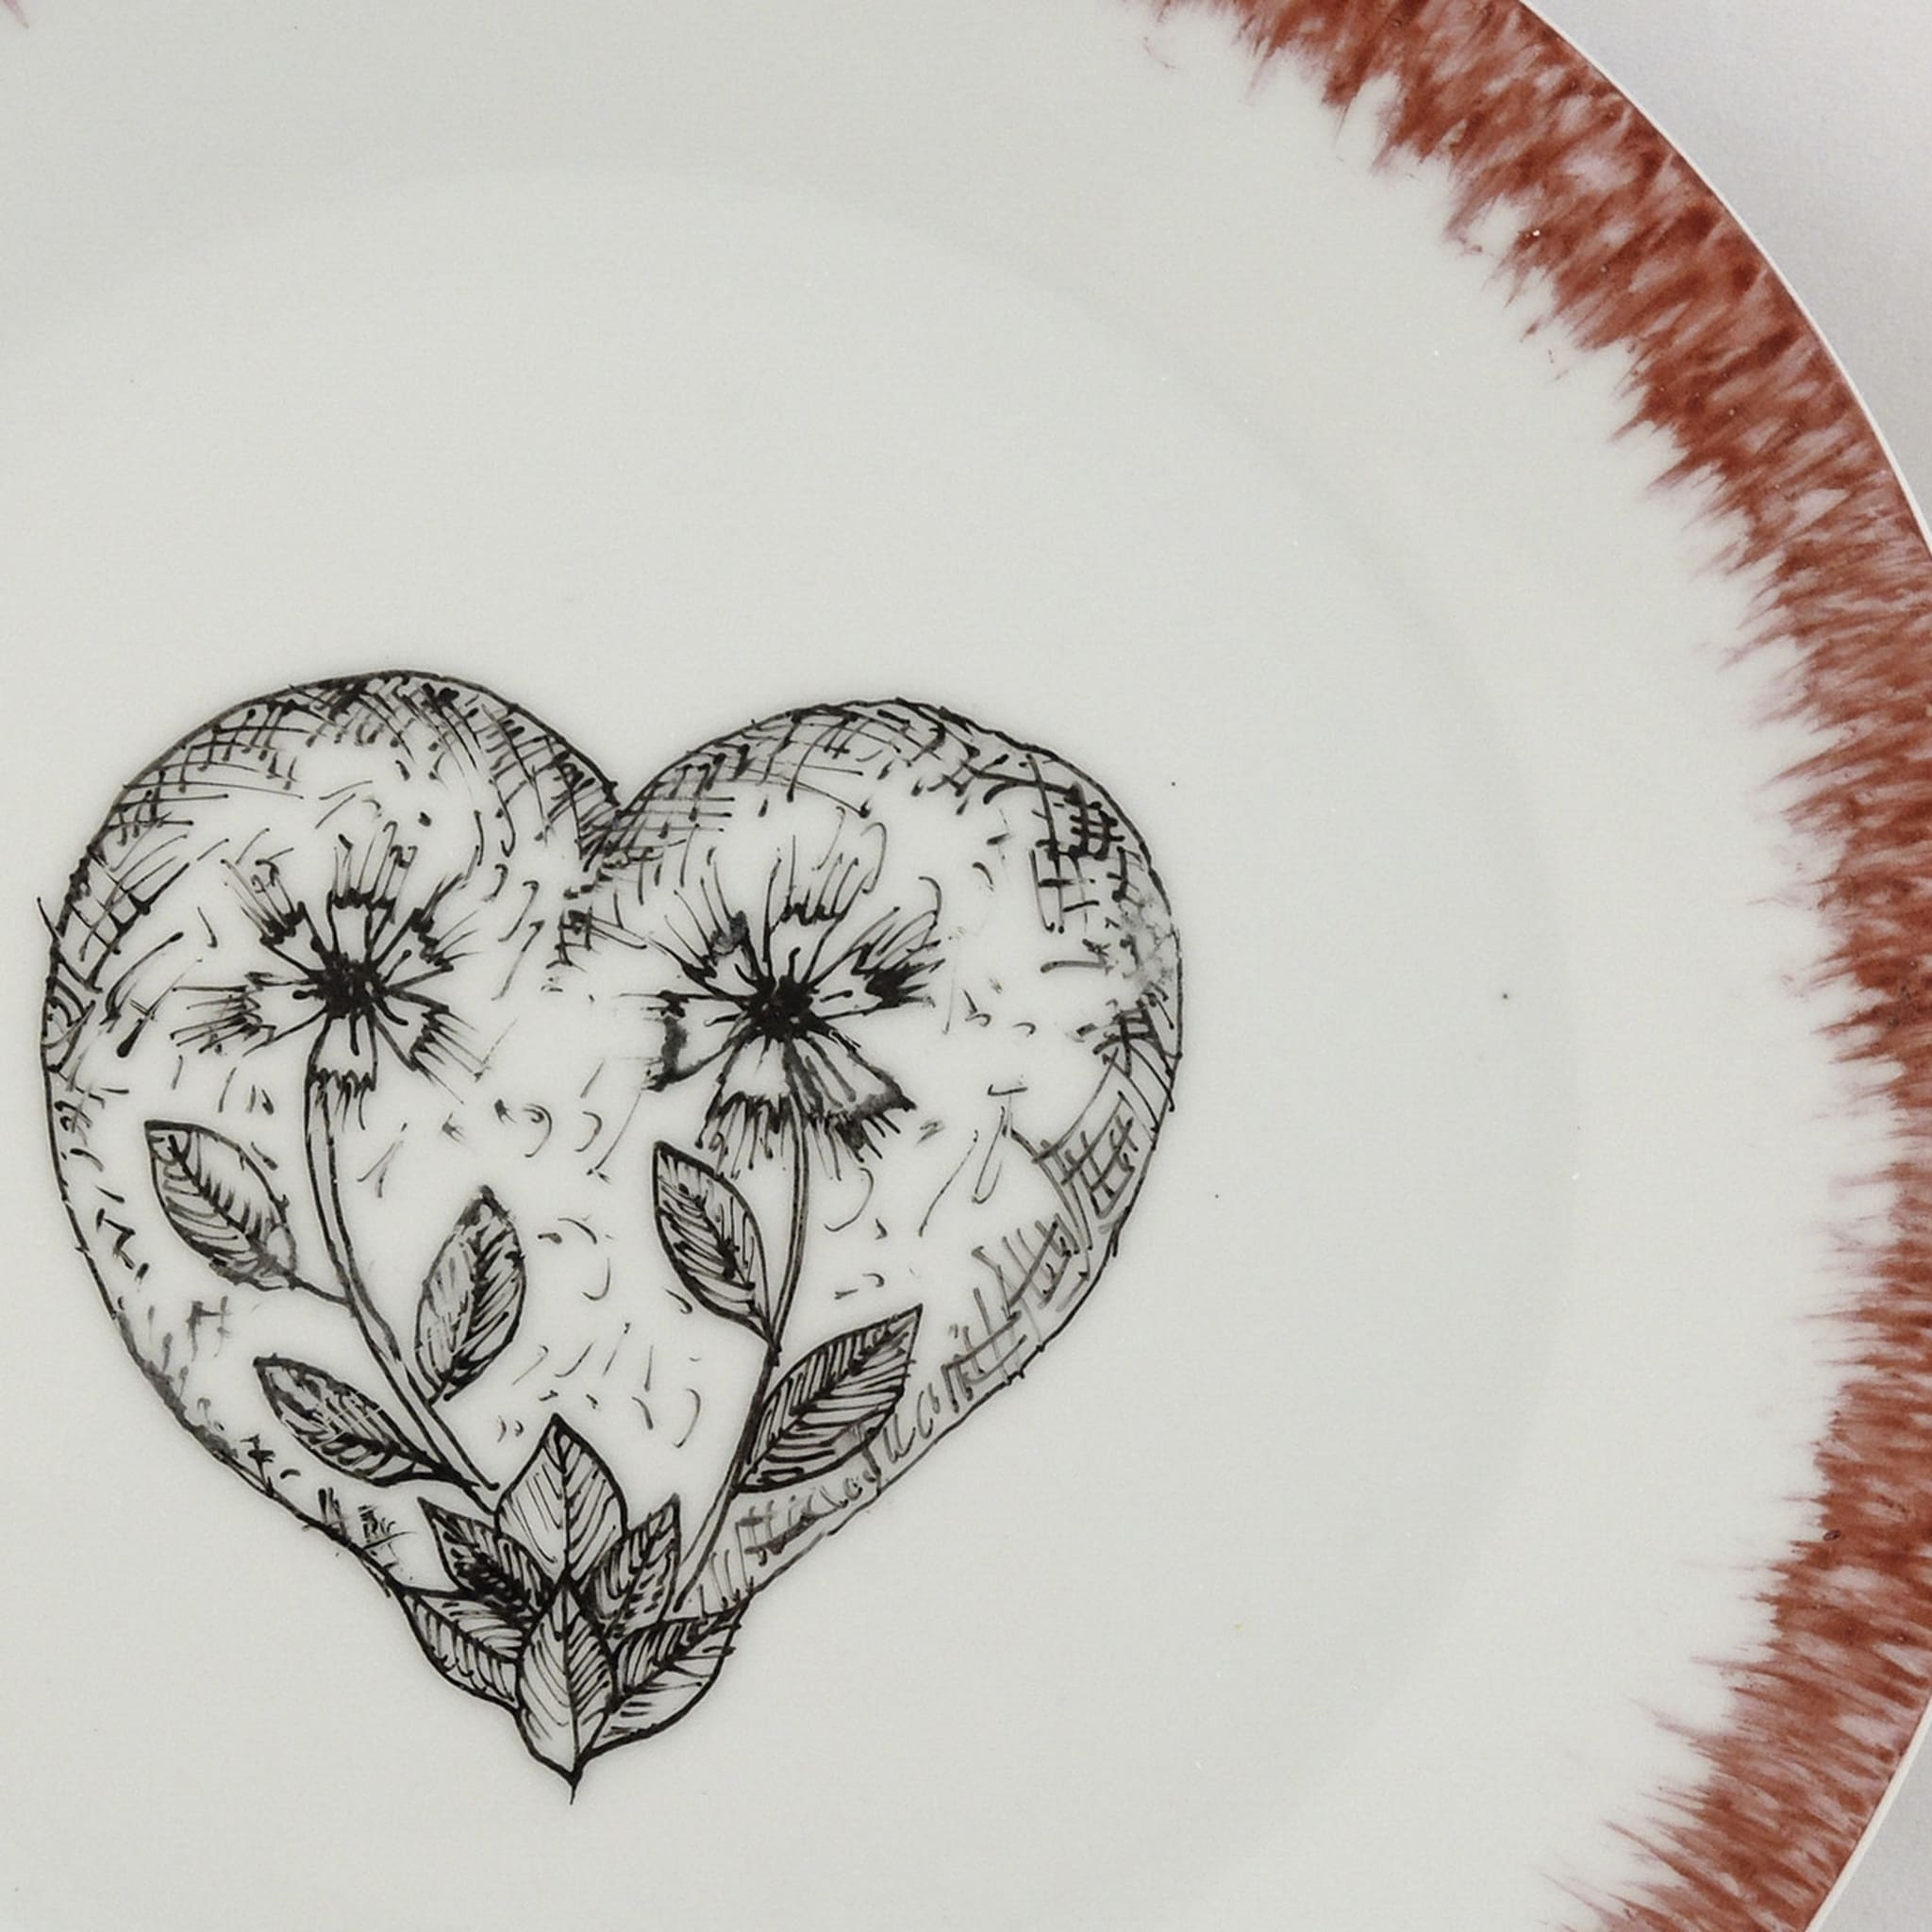 Carnation Heart Plate - Hearts collection - Alternative view 1